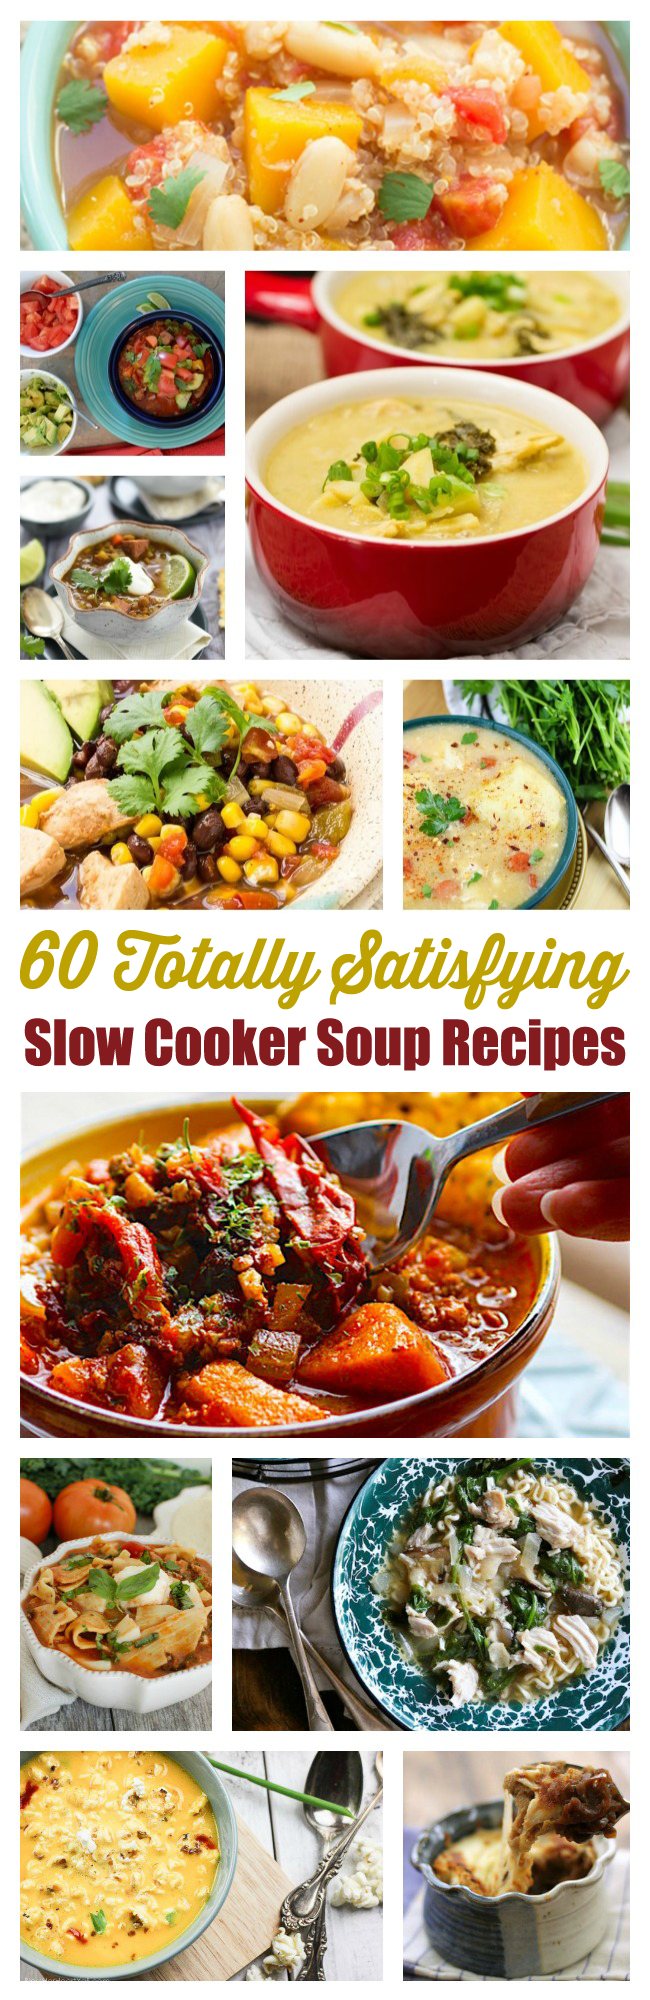 Feeling chilly this winter? Snag this collection of slow cooker soup recipes to satisfy.